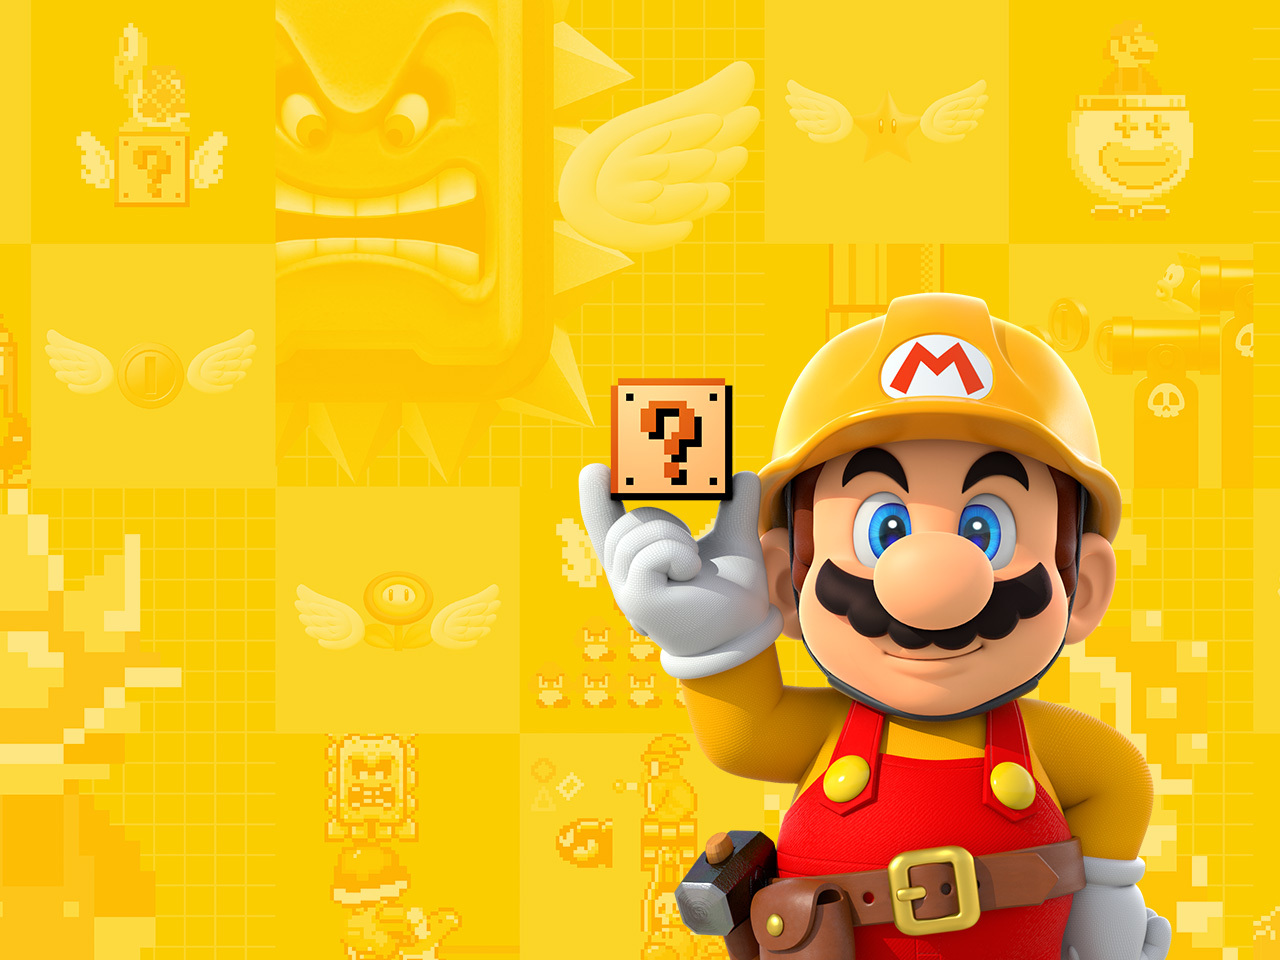 11 games we want to see for the Nintendo Switch: Super Mario Maker